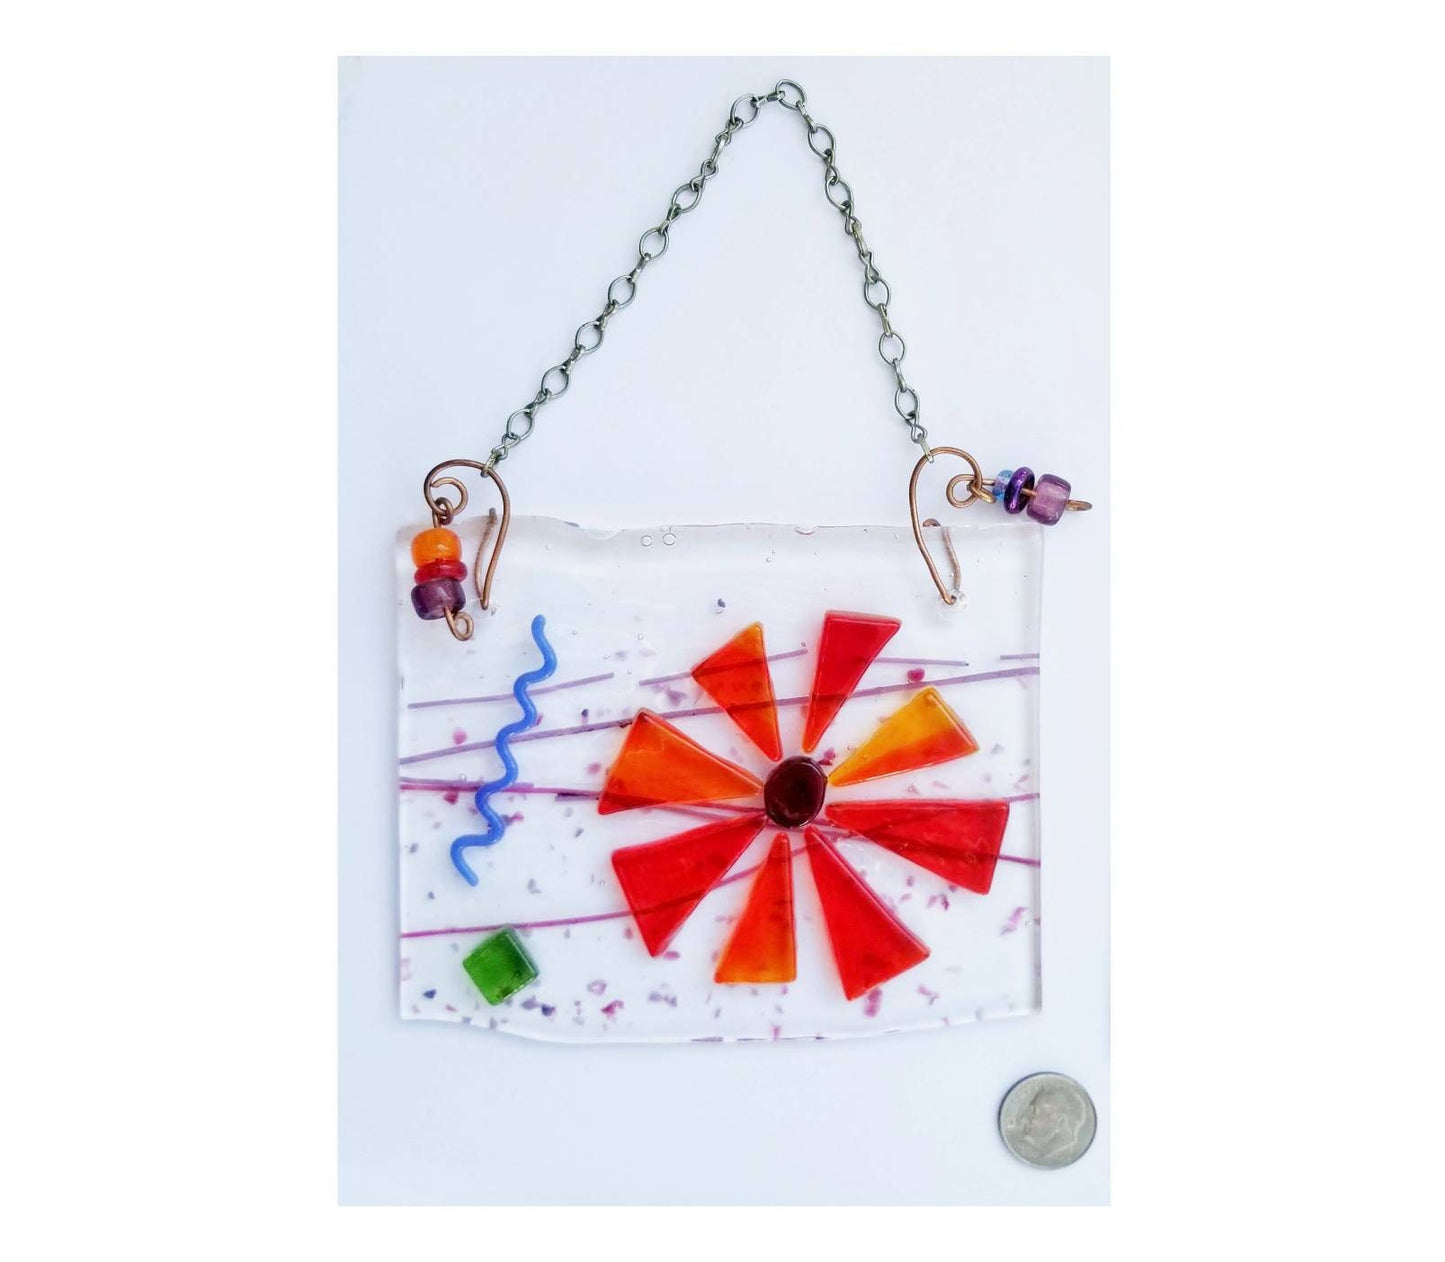 Flower Suncatcher, Window Hanging. Fused Glass Daisy. Orange, Purple. Torched & Flameworked Embellishments. Copper wire with glass beads.